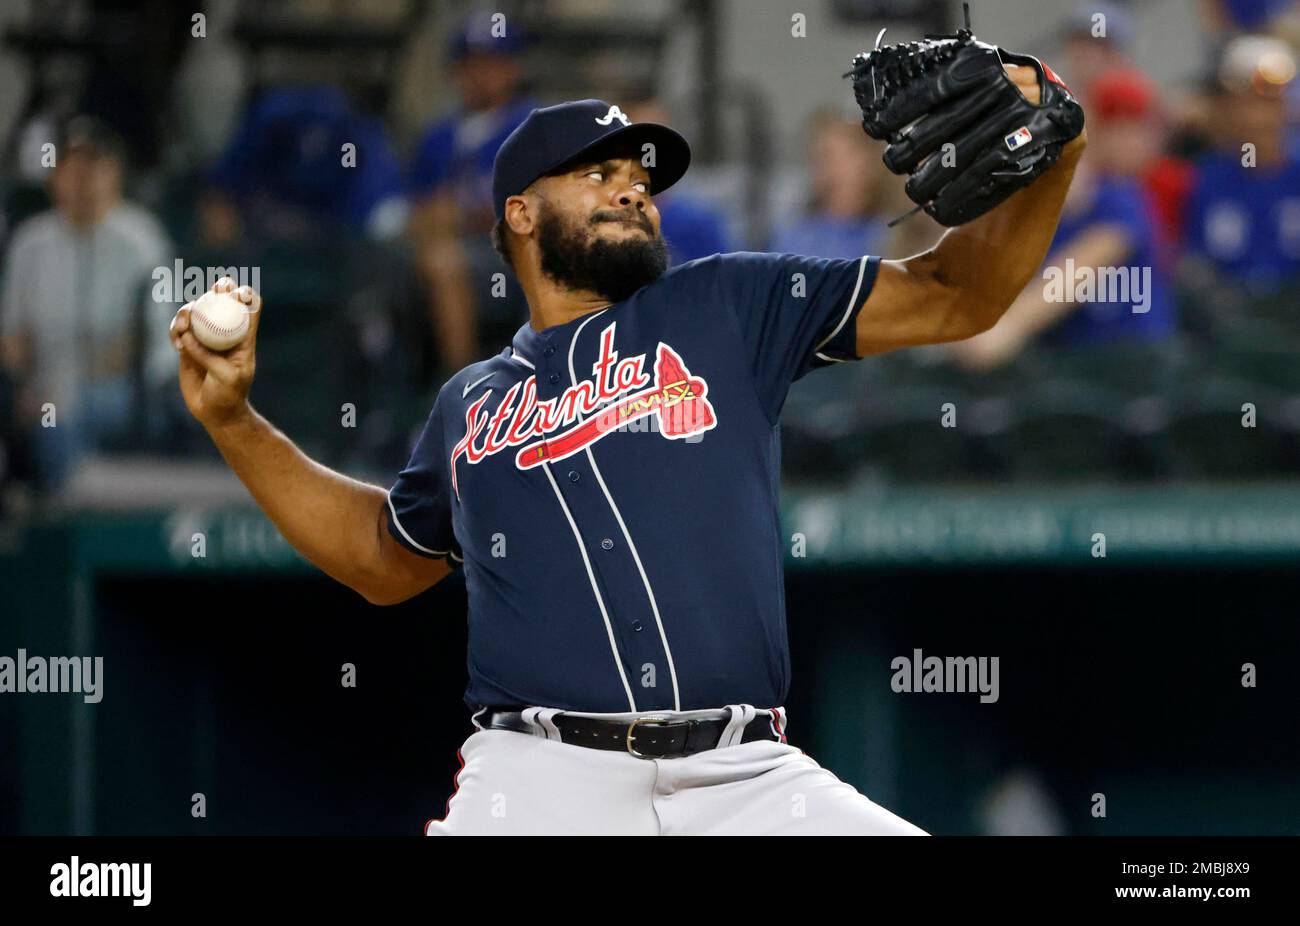 Atlanta Braves pitcher Kenley Jansen delivers against the Texas Rangers  during the ninth inning of a baseball game Friday, April 29, 2022, in  Arlington, Texas. (AP Photo/Ron Jenkins Stock Photo - Alamy